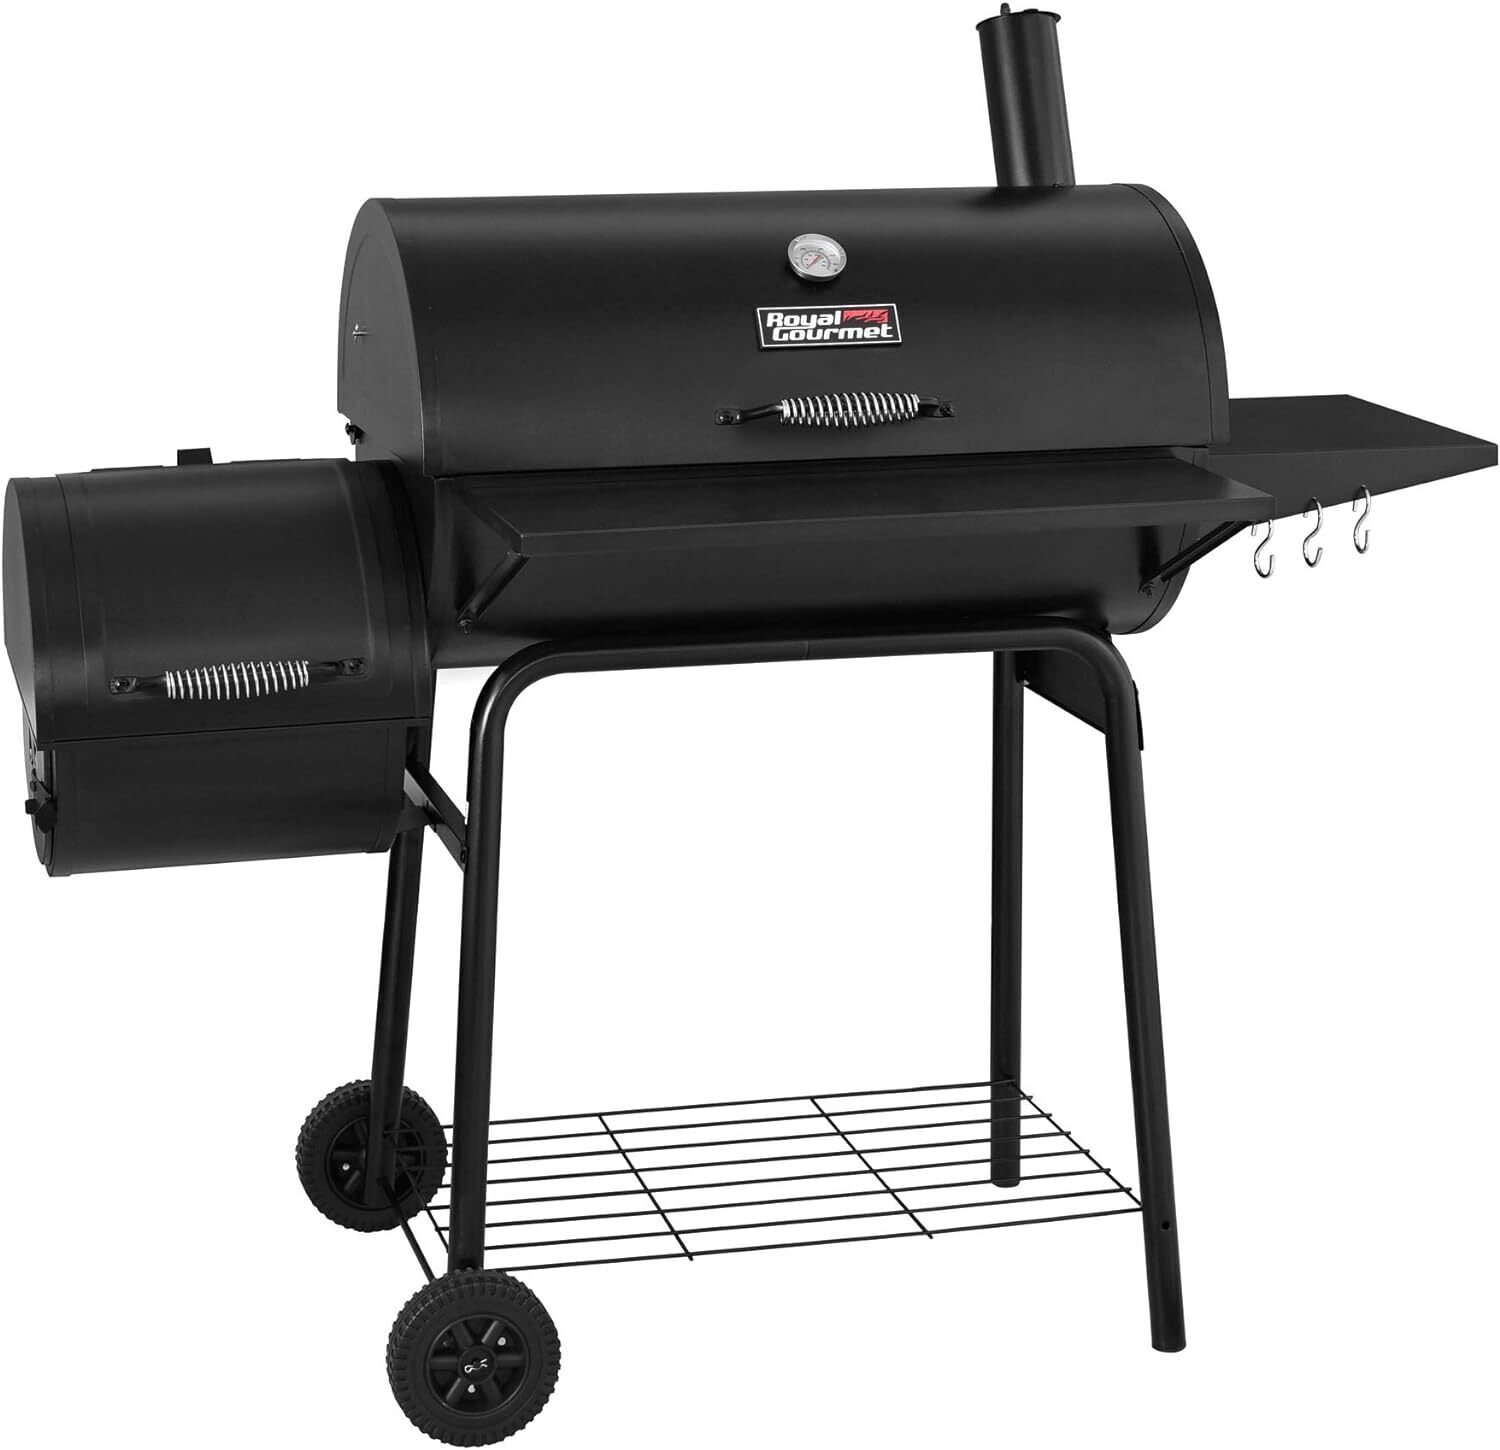 BBQ Charcoal Grill and Offset Smoker | 811 Square Inch cooking surface